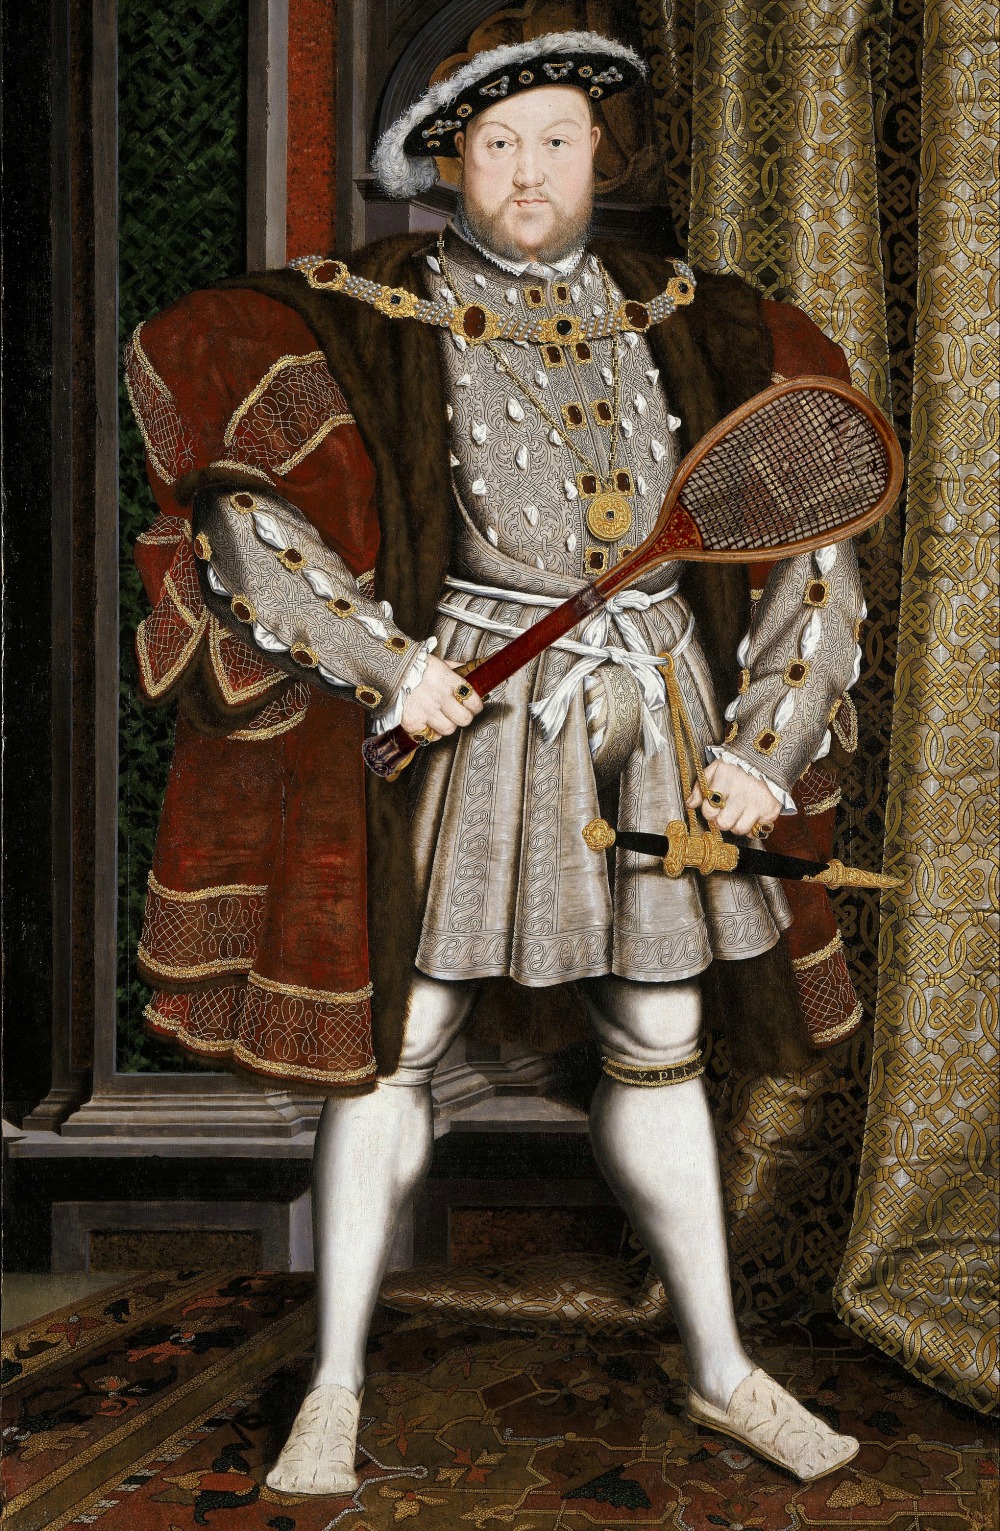 Henry VIII was a masterful tennis player